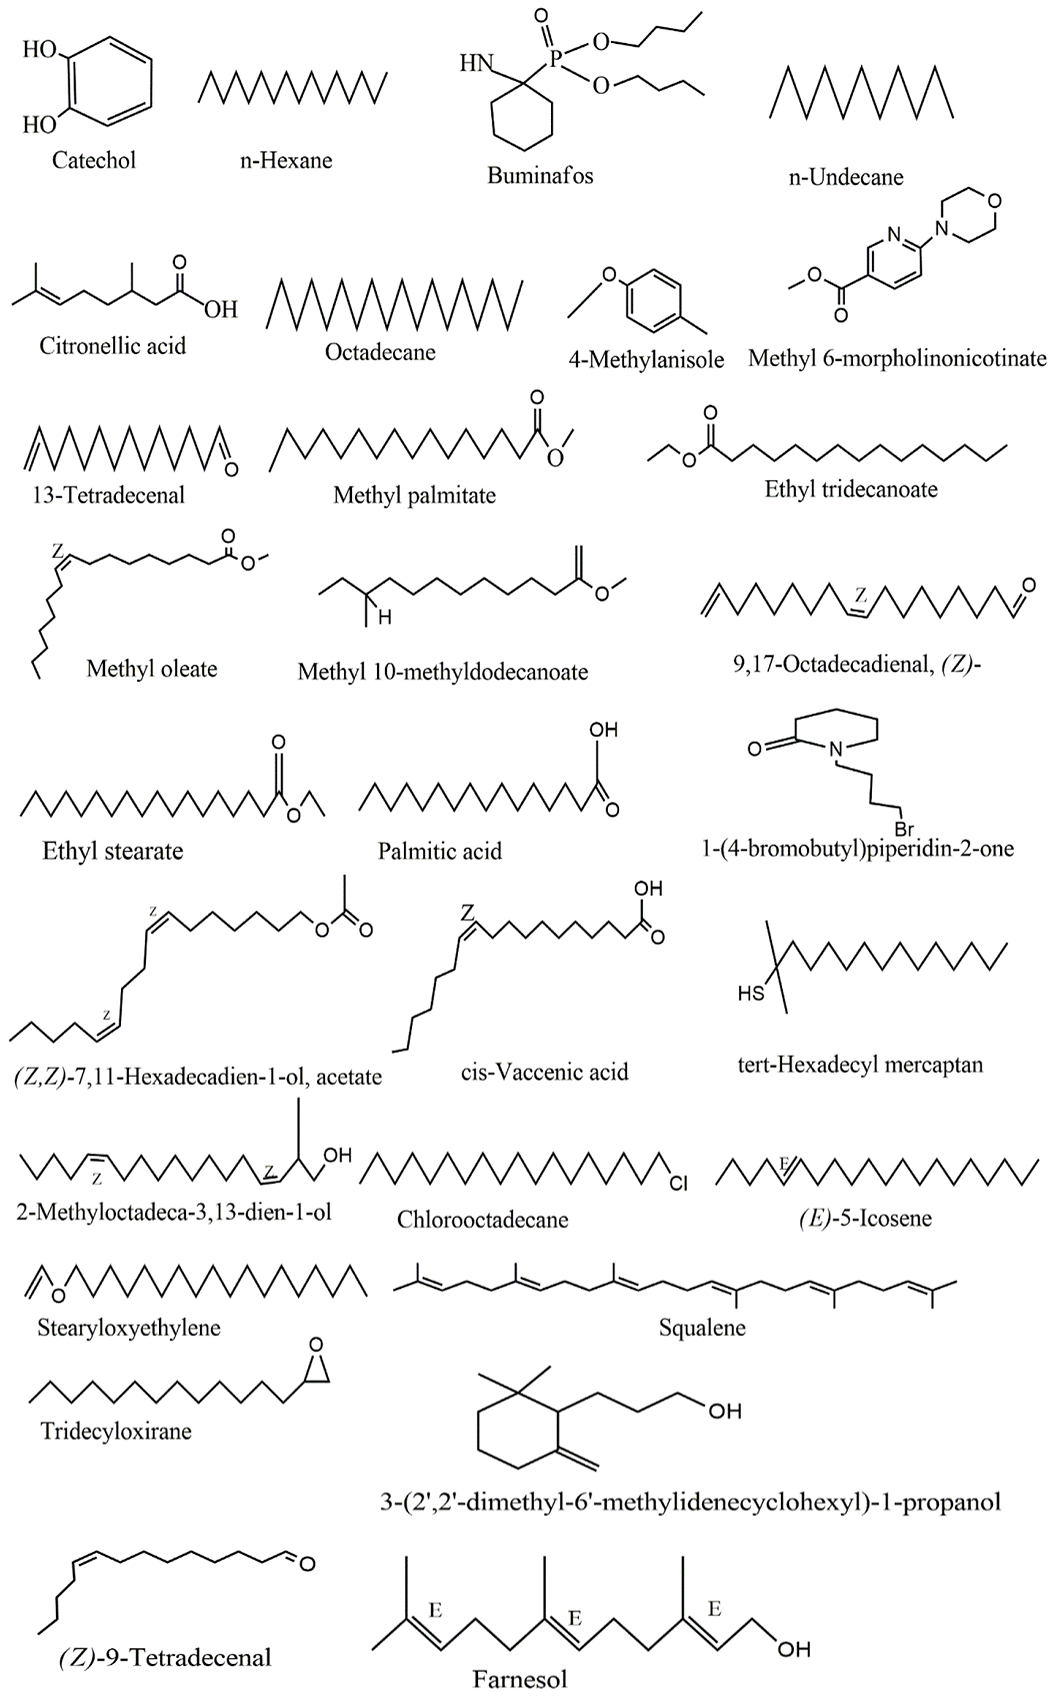 Figure 1. Structures of identified compounds in ethanol extract of Neonauclea excelsa.